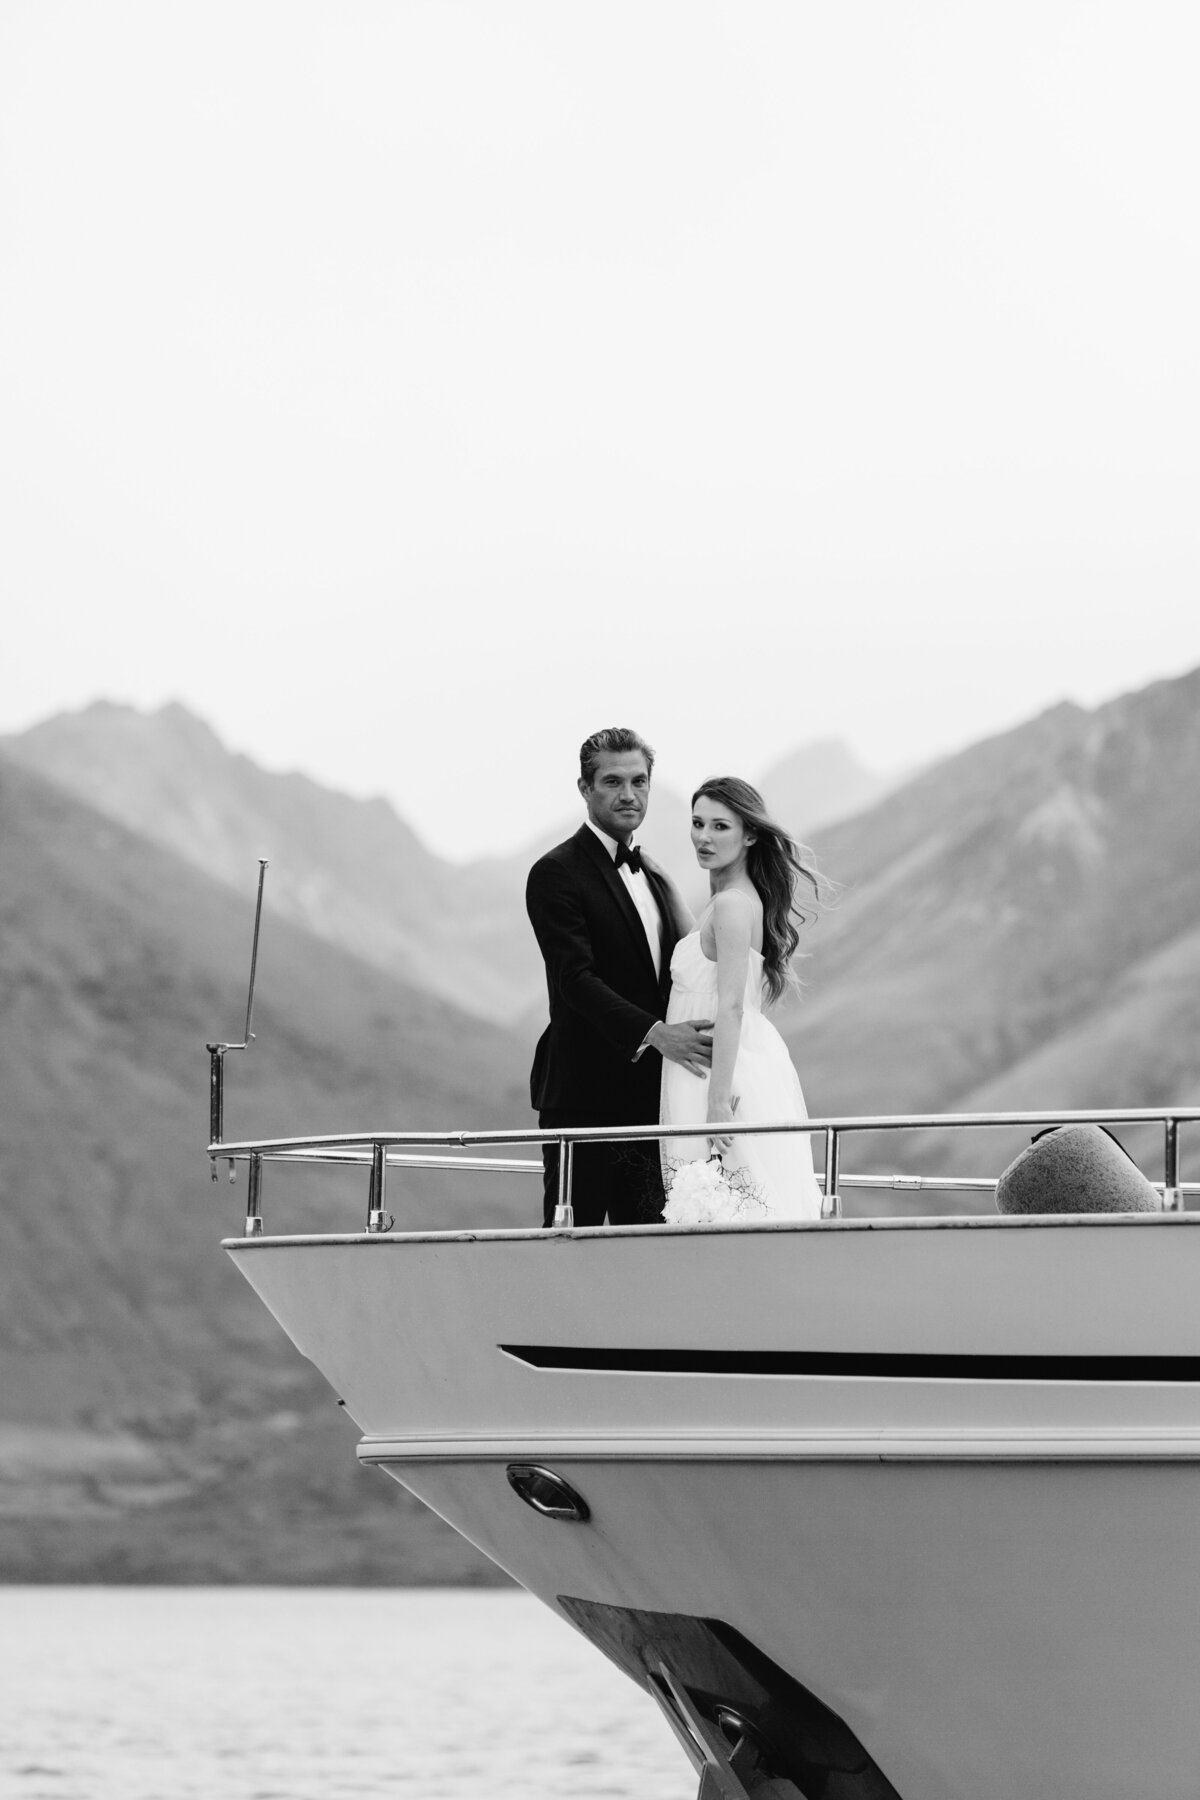 The Lovers Elopement Co - bride and groom on boat in Queenstown lake, New Zealand